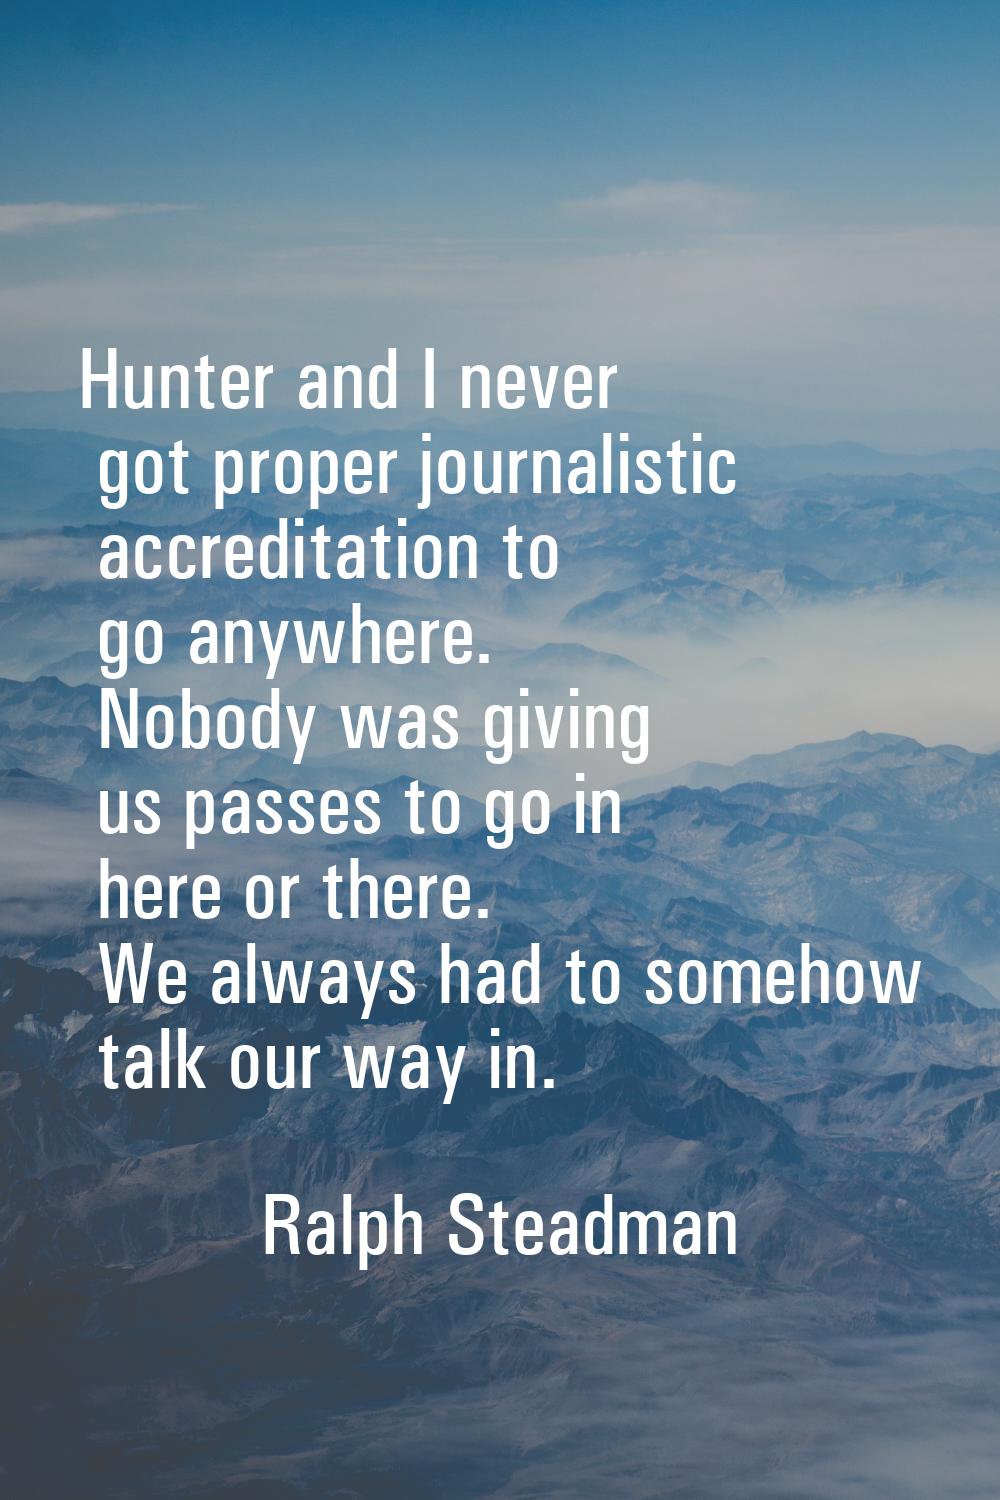 Hunter and I never got proper journalistic accreditation to go anywhere. Nobody was giving us passe